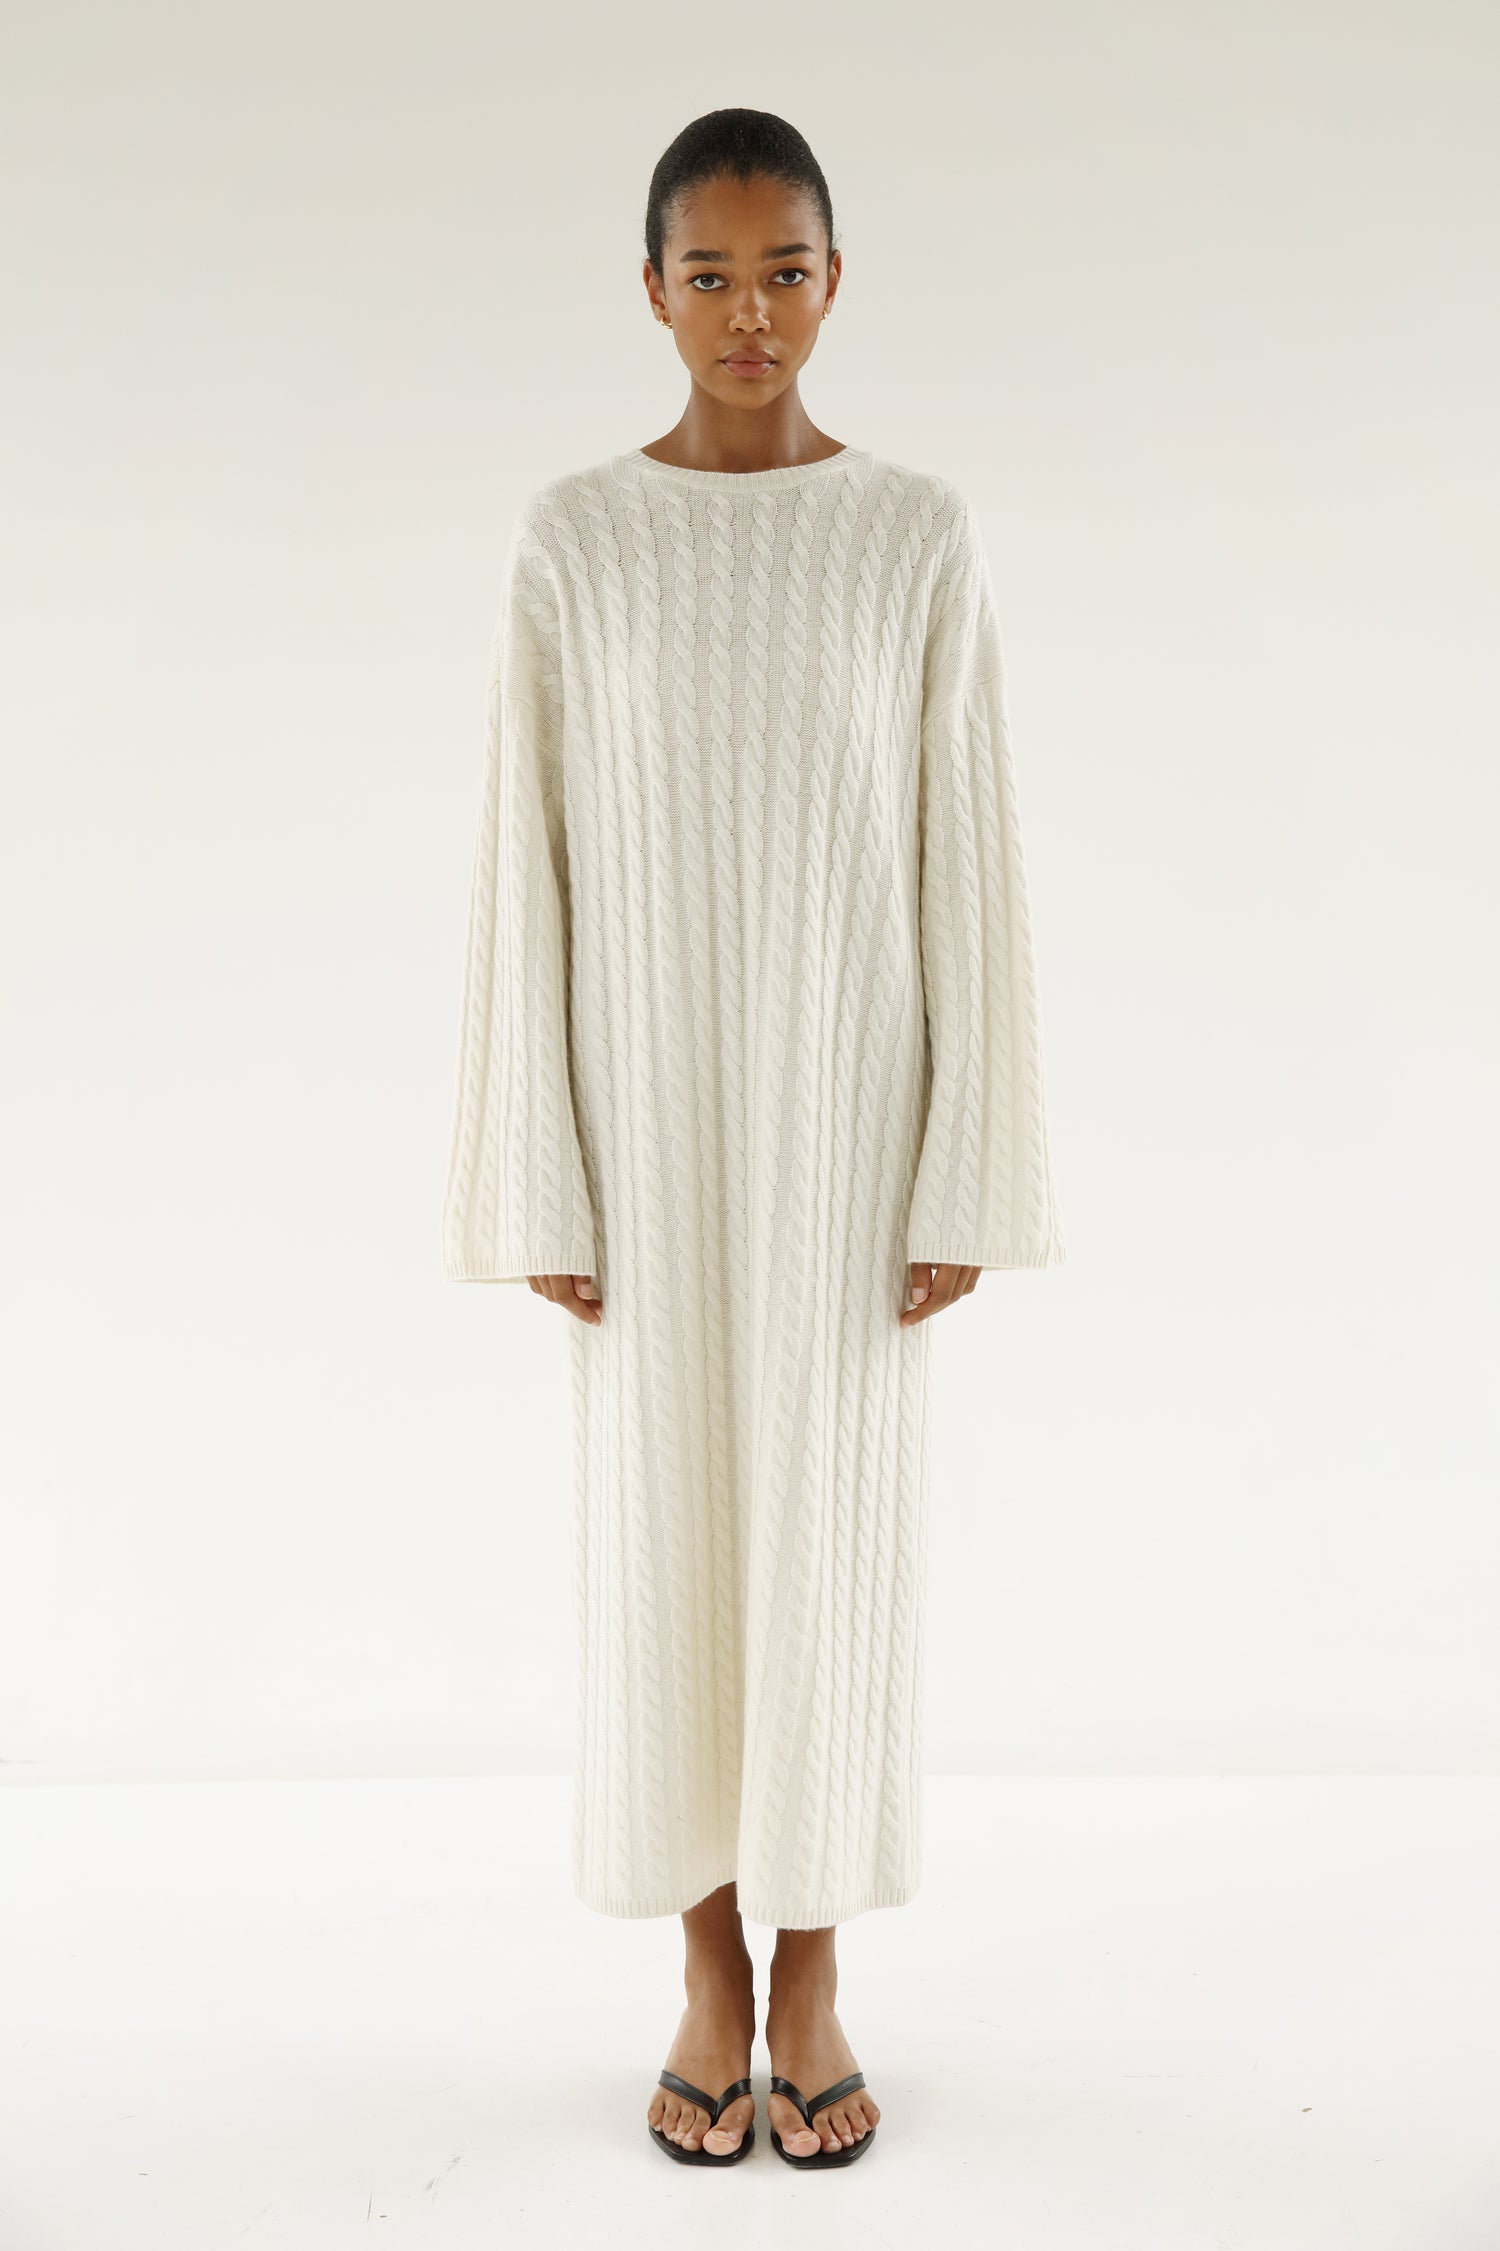 Noma Cable Knit Dress, cream